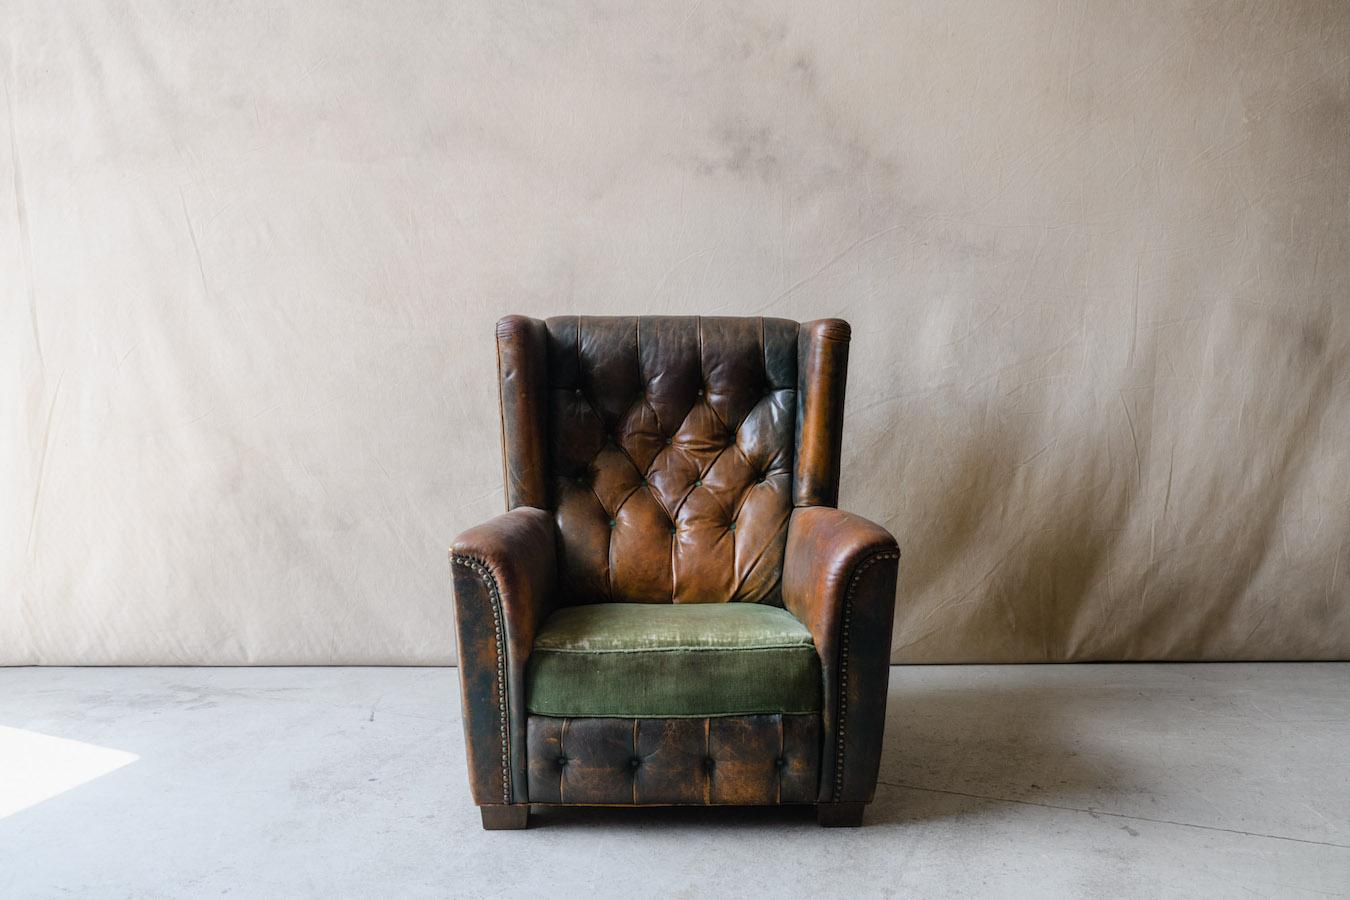 20th Century leather wingback chair from Denmark, Circa 1940. Superb large model with original green leather and velvet upholstery. Amazing wear and patina on the leather, with large nail heads at seams. 

We have kept this one for ourselves for the